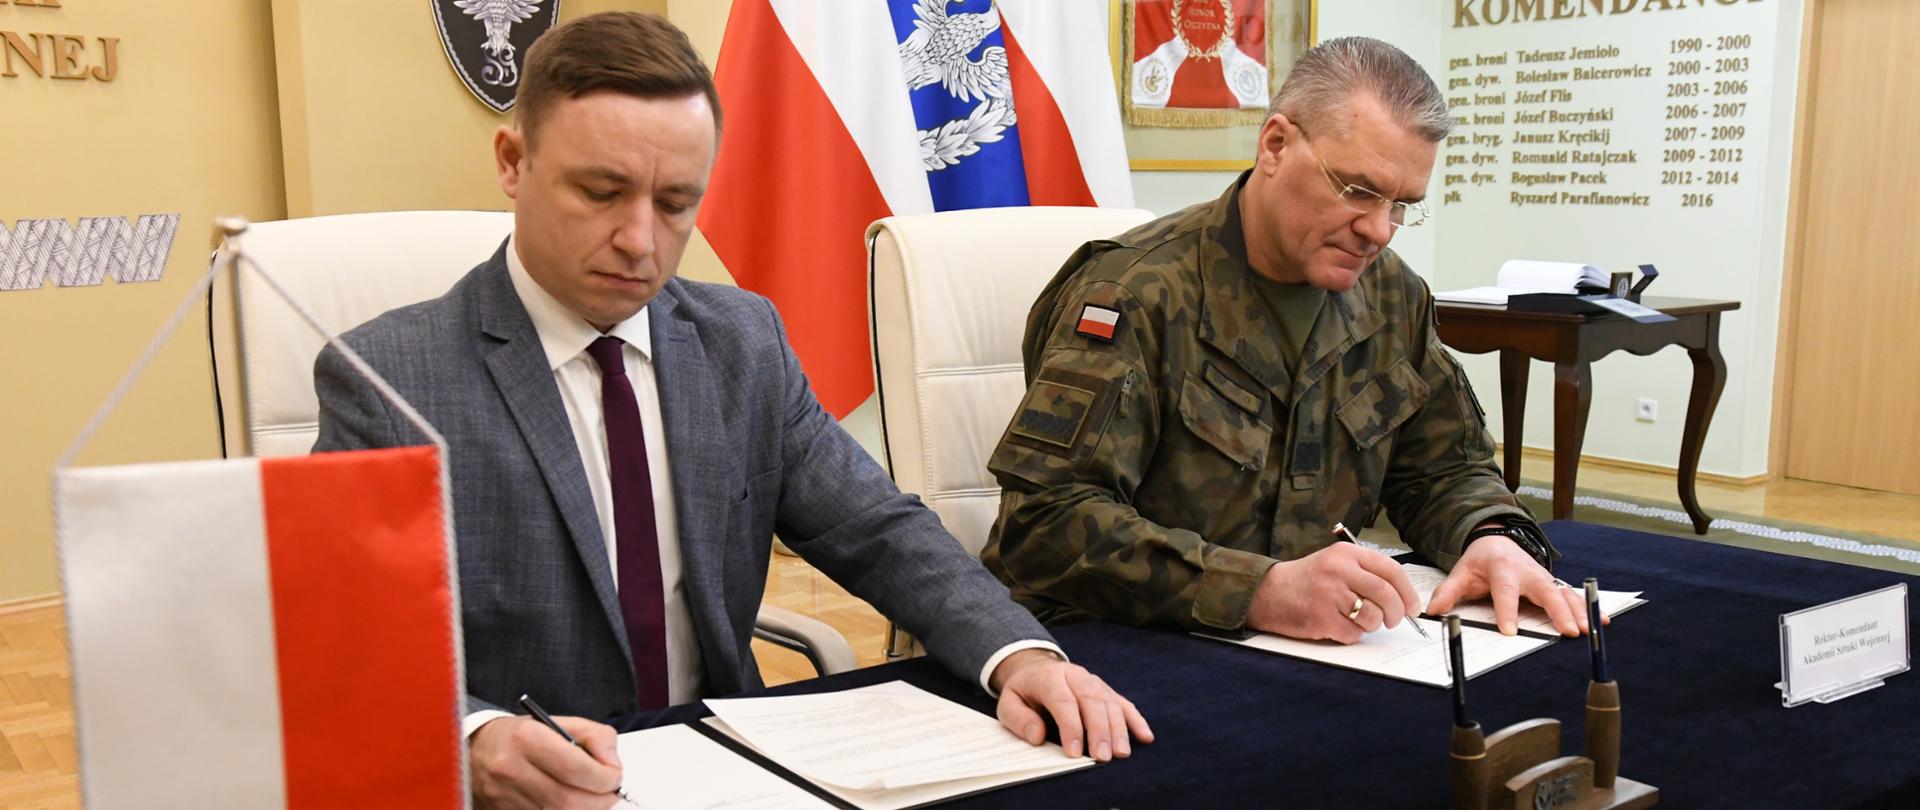 The agreement was signed by Andrzej Głowacki, acting as the President of the PAA (left), and BG Robert Kosowski, PhD and Rector-Commandant of the ASzWoj (right)